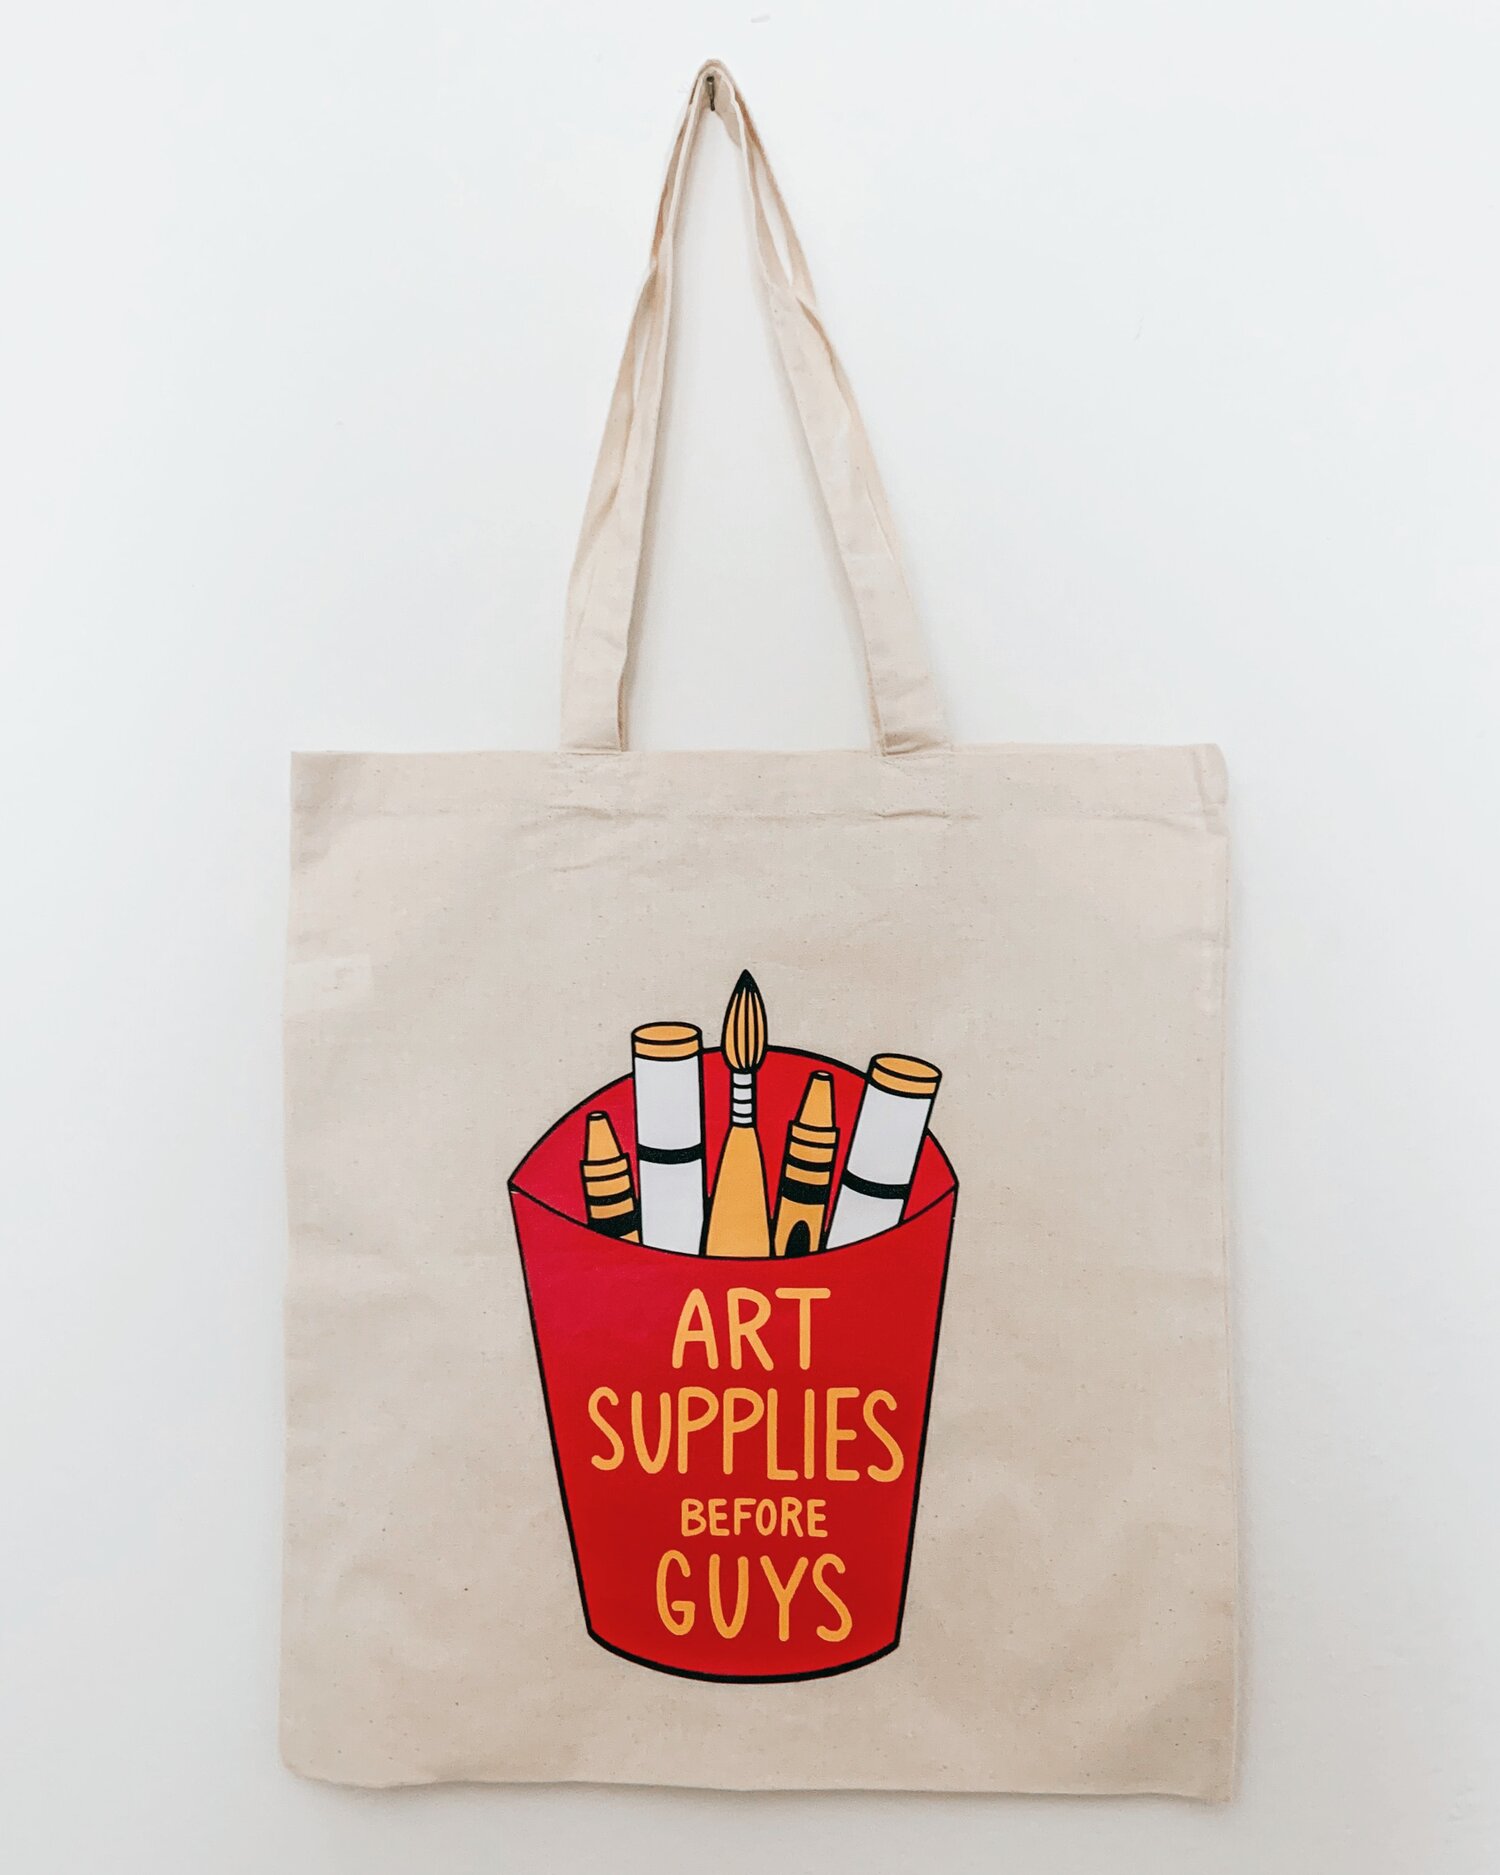 Art Supplies Before Guys Large Tote — Creative & Caffeinated